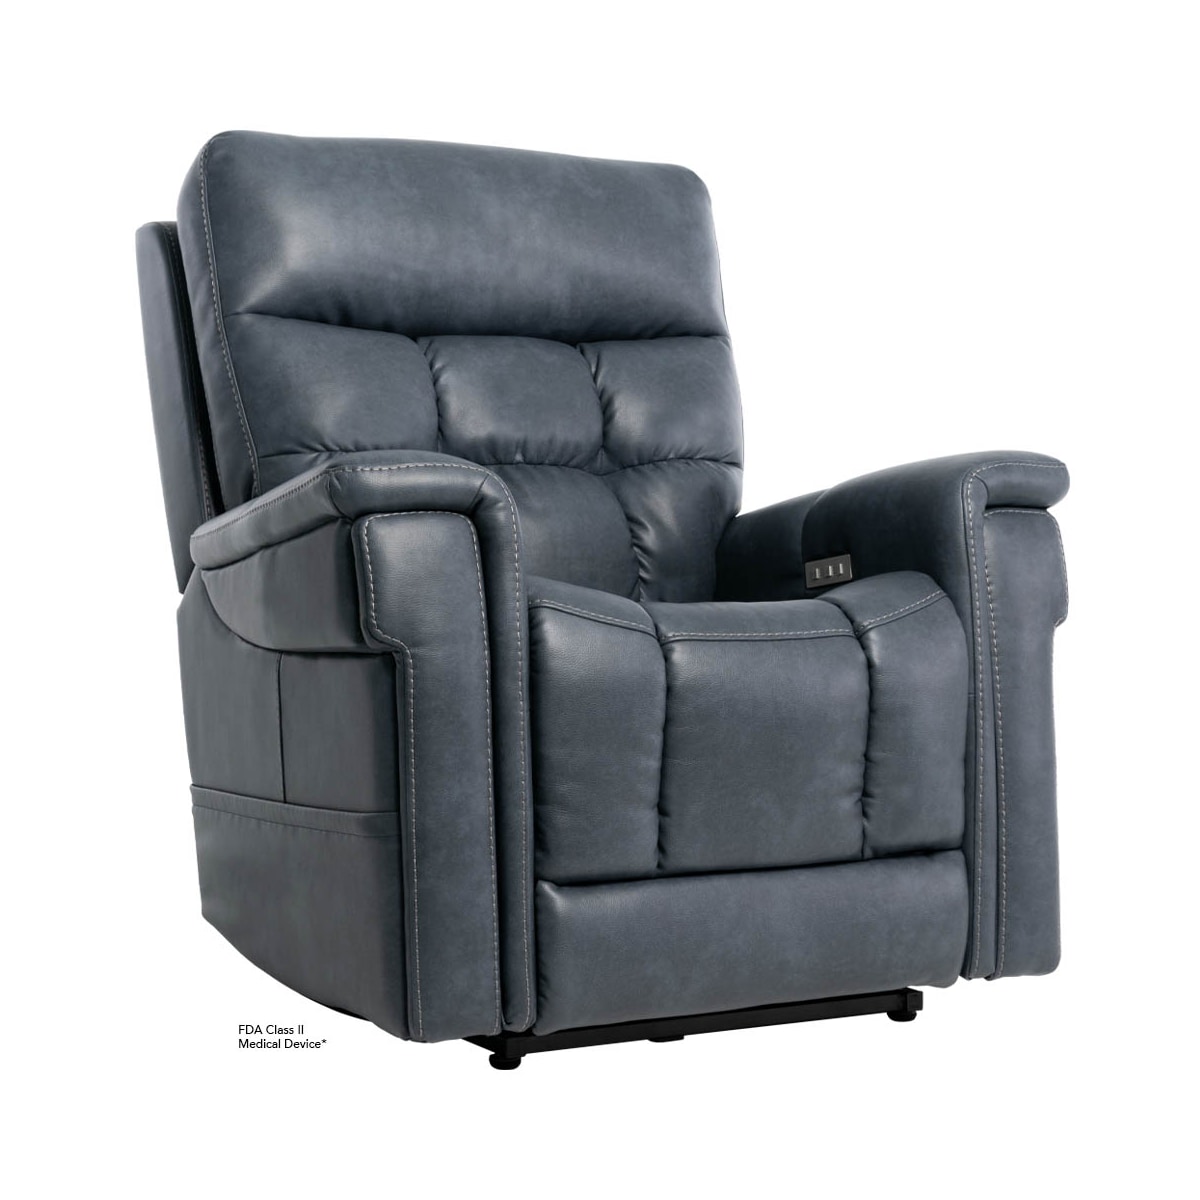 Pride Vivalift! Ultra recliner lift chair in slate gray, seated position